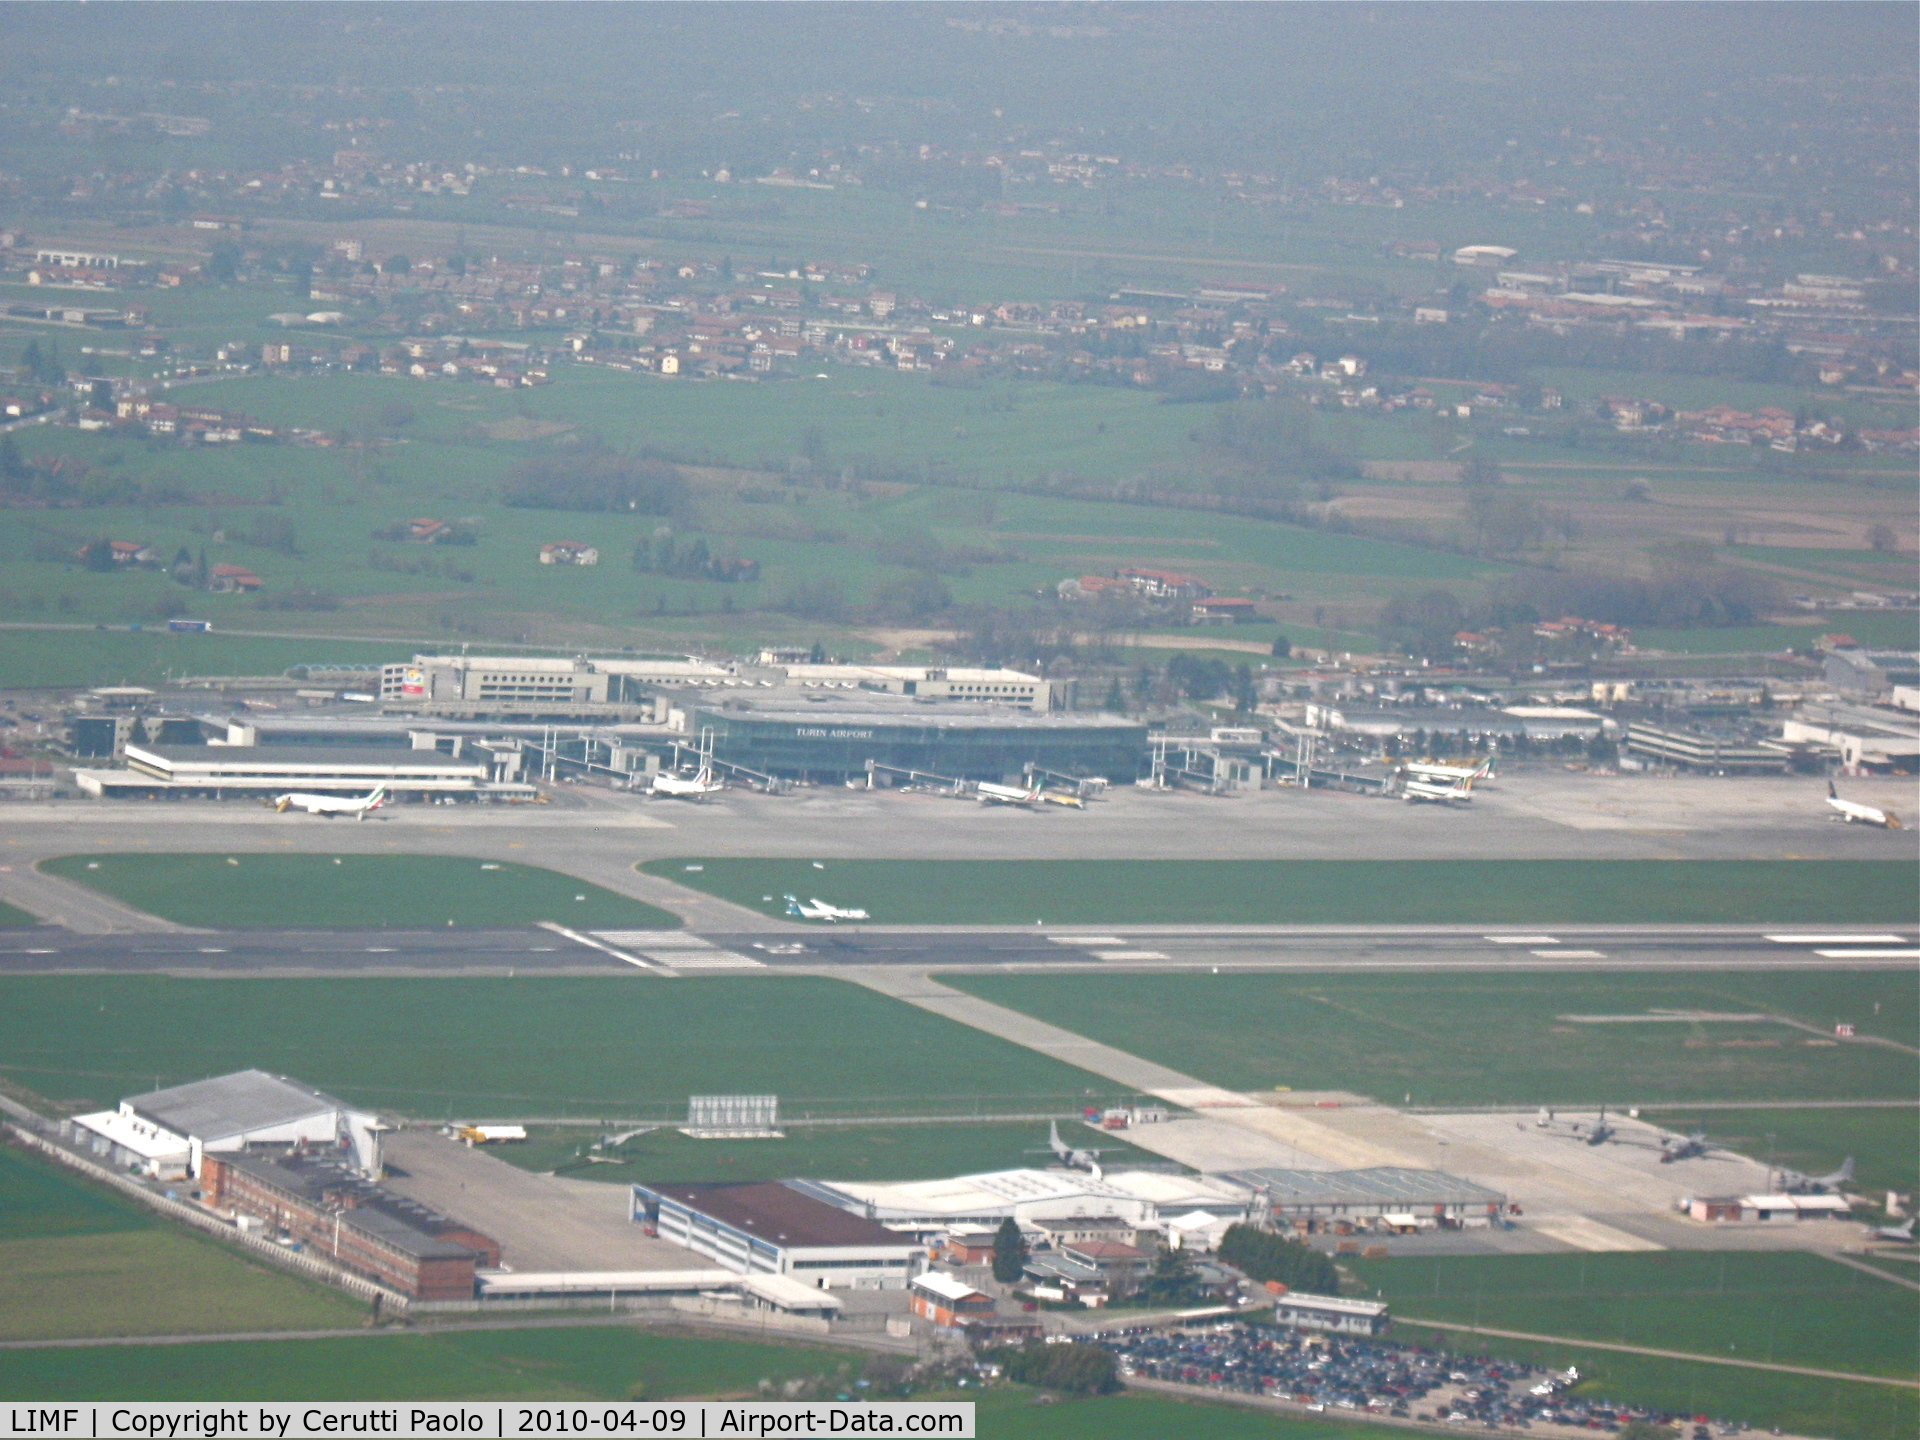 Turin International Airport (Torino Caselle Airport), Turin (Torino) Italy (LIMF) - Overview of Turin airport from the right downwind of runway 36 while an ATR72 of Air Dolomiti is landing.